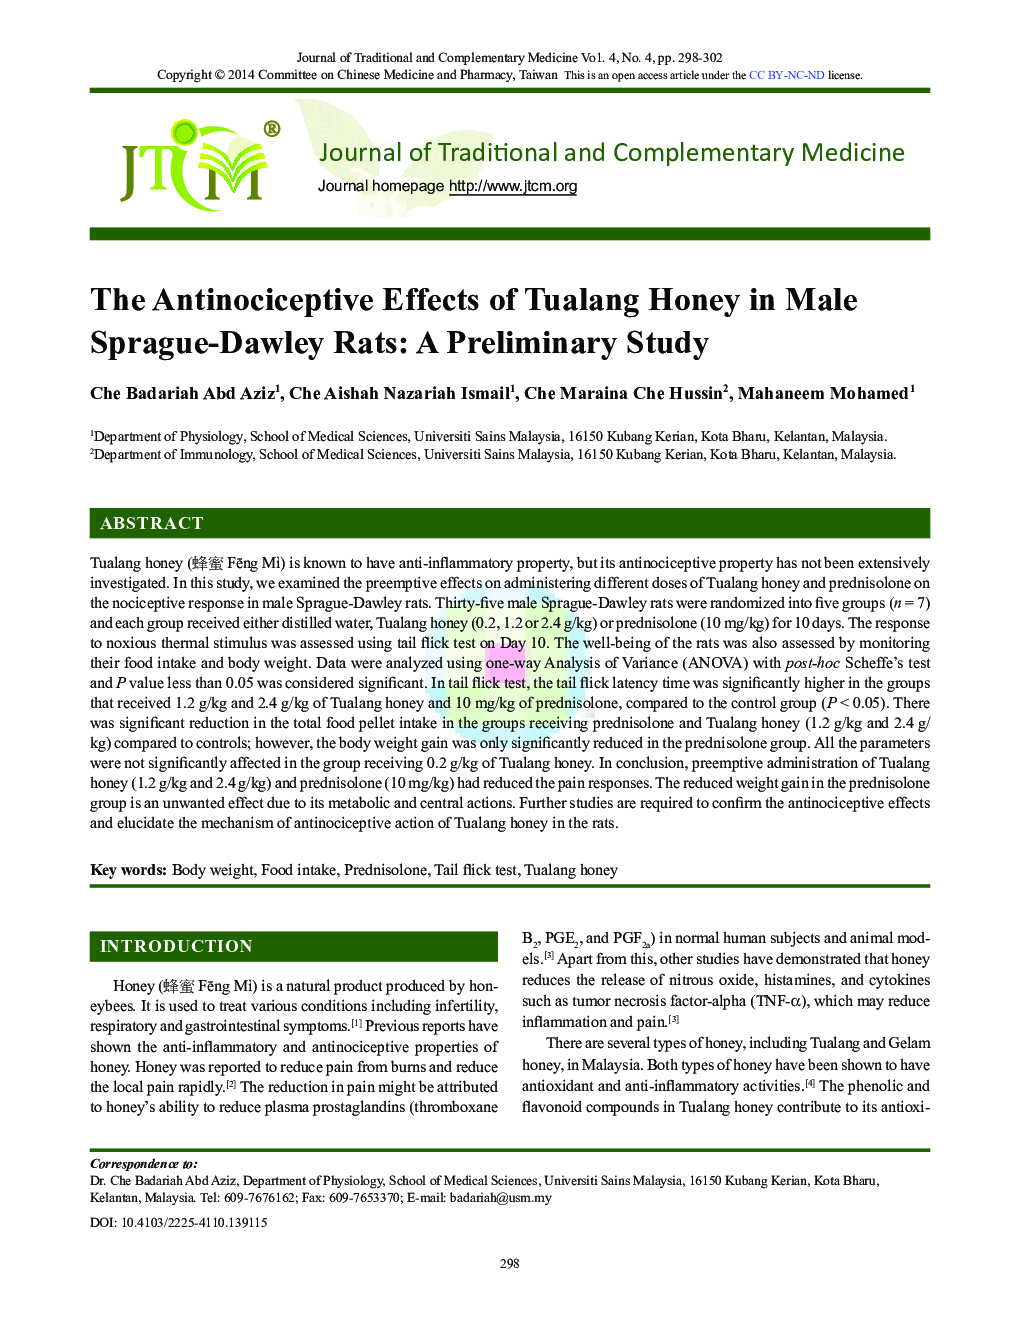 The Antinociceptive Effects of Tualang Honey in Male Sprague-Dawley Rats: A Preliminary Study